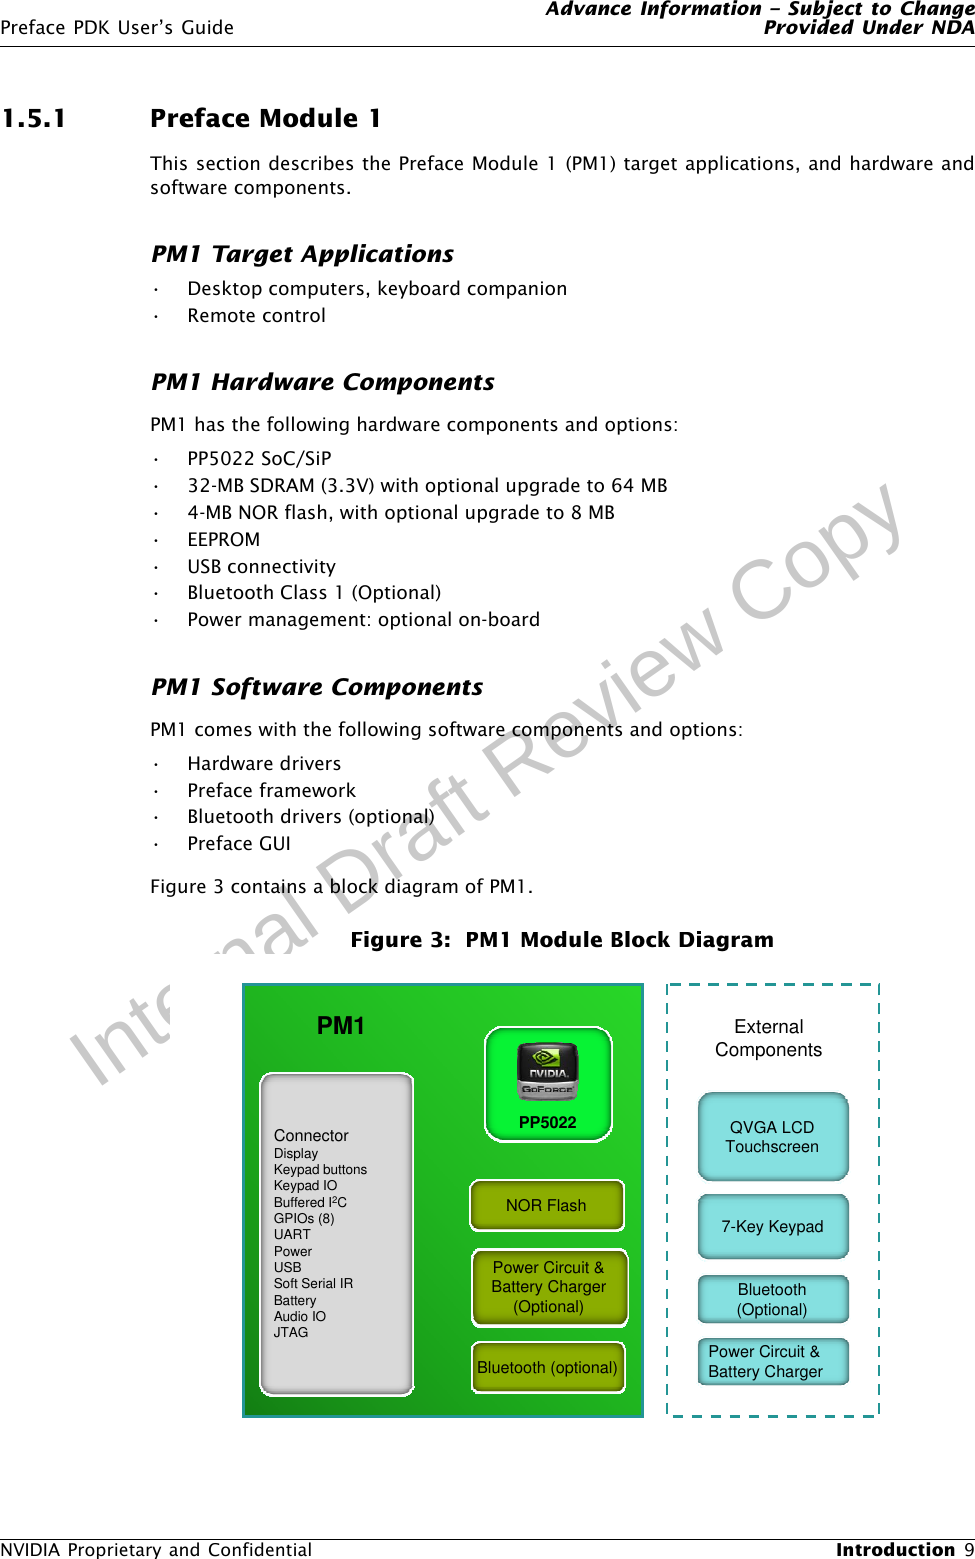 Advance Information – Subject to ChangePreface PDK User’s Guide Provided Under NDANVIDIA Proprietary and Confidential  Introduction 9Internal Draft Review Copy1.5.1 Preface Module 1This section describes the Preface Module 1 (PM1) target applications, and hardware andsoftware components.PM1 Target Applications• Desktop computers, keyboard companion• Remote controlPM1 Hardware ComponentsPM1 has the following hardware components and options:• PP5022 SoC/SiP• 32-MB SDRAM (3.3V) with optional upgrade to 64 MB•4-MB NOR flash, with optional upgrade to 8 MB• EEPROM• USB connectivity• Bluetooth Class 1 (Optional)• Power management: optional on-boardPM1 Software ComponentsPM1 comes with the following software components and options:• Hardware drivers• Preface framework• Bluetooth drivers (optional)•Preface GUIFigure 3 contains a block diagram of PM1.Figure 3:  PM1 Module Block DiagramPP5022NOR FlashPower Circuit &amp;Battery Charger(Optional) Bluetooth(Optional)QVGA LCDTouchscreen7-Key KeypadConnector DisplayKeypad buttonsKeypad IOBuffered I2CGPIOs (8)UARTPowerUSBSoft Serial IRBatteryAudio IOJTAGBluetooth (optional)ExternalComponentsPM1Power Circuit &amp;Battery Charger